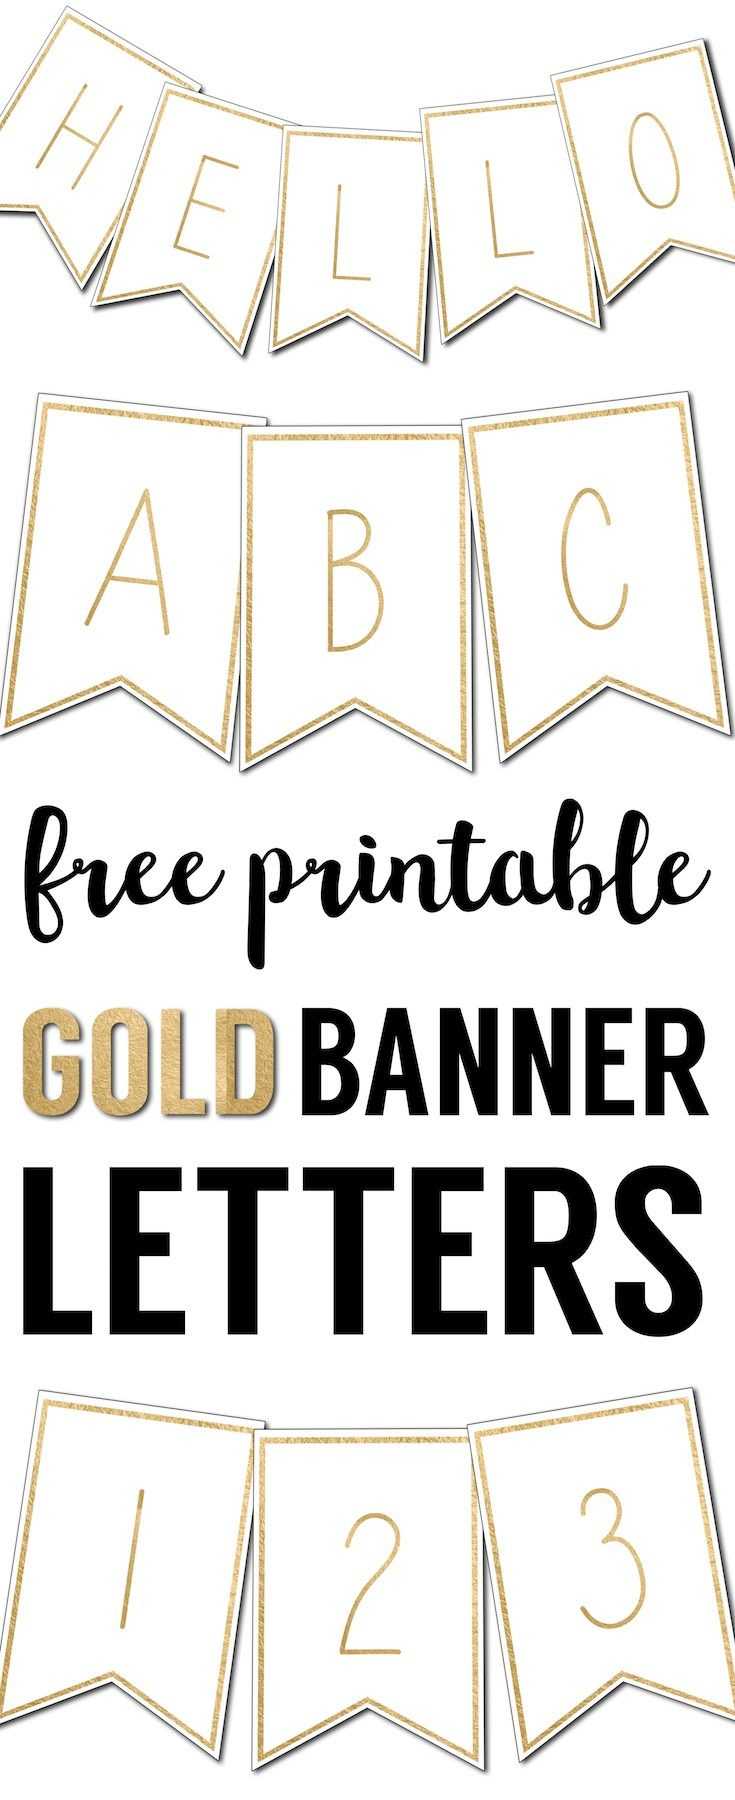 Free Printable Banner Letters Templates | Free Printable With Letter Templates For Banners